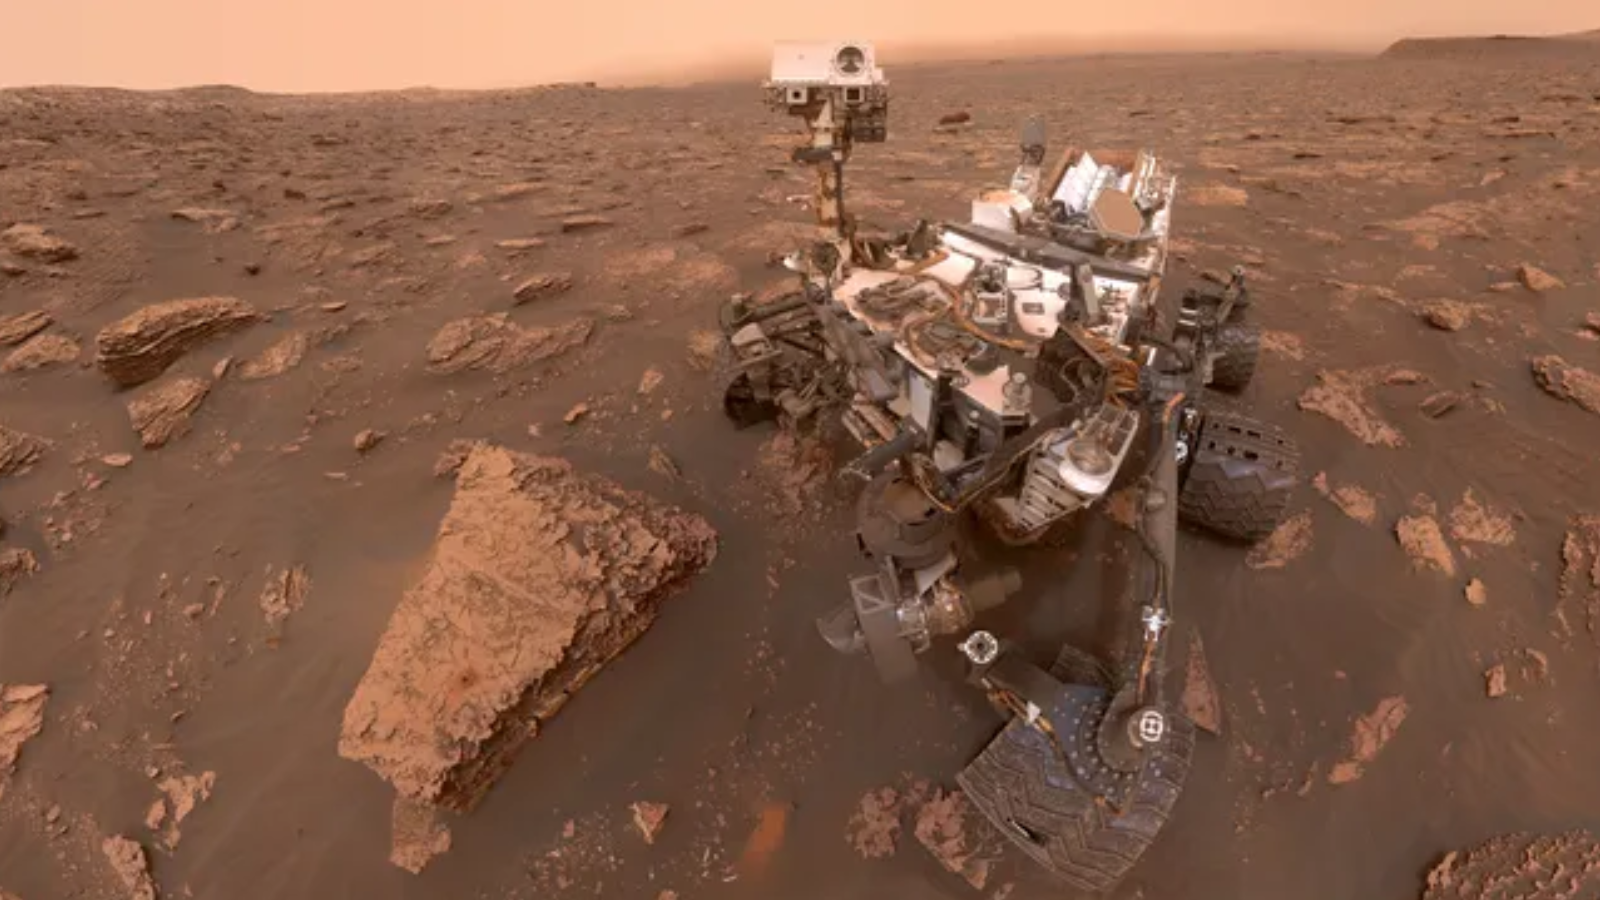 Curiosity rover may be 'burping' methane out of Mars' subsurface